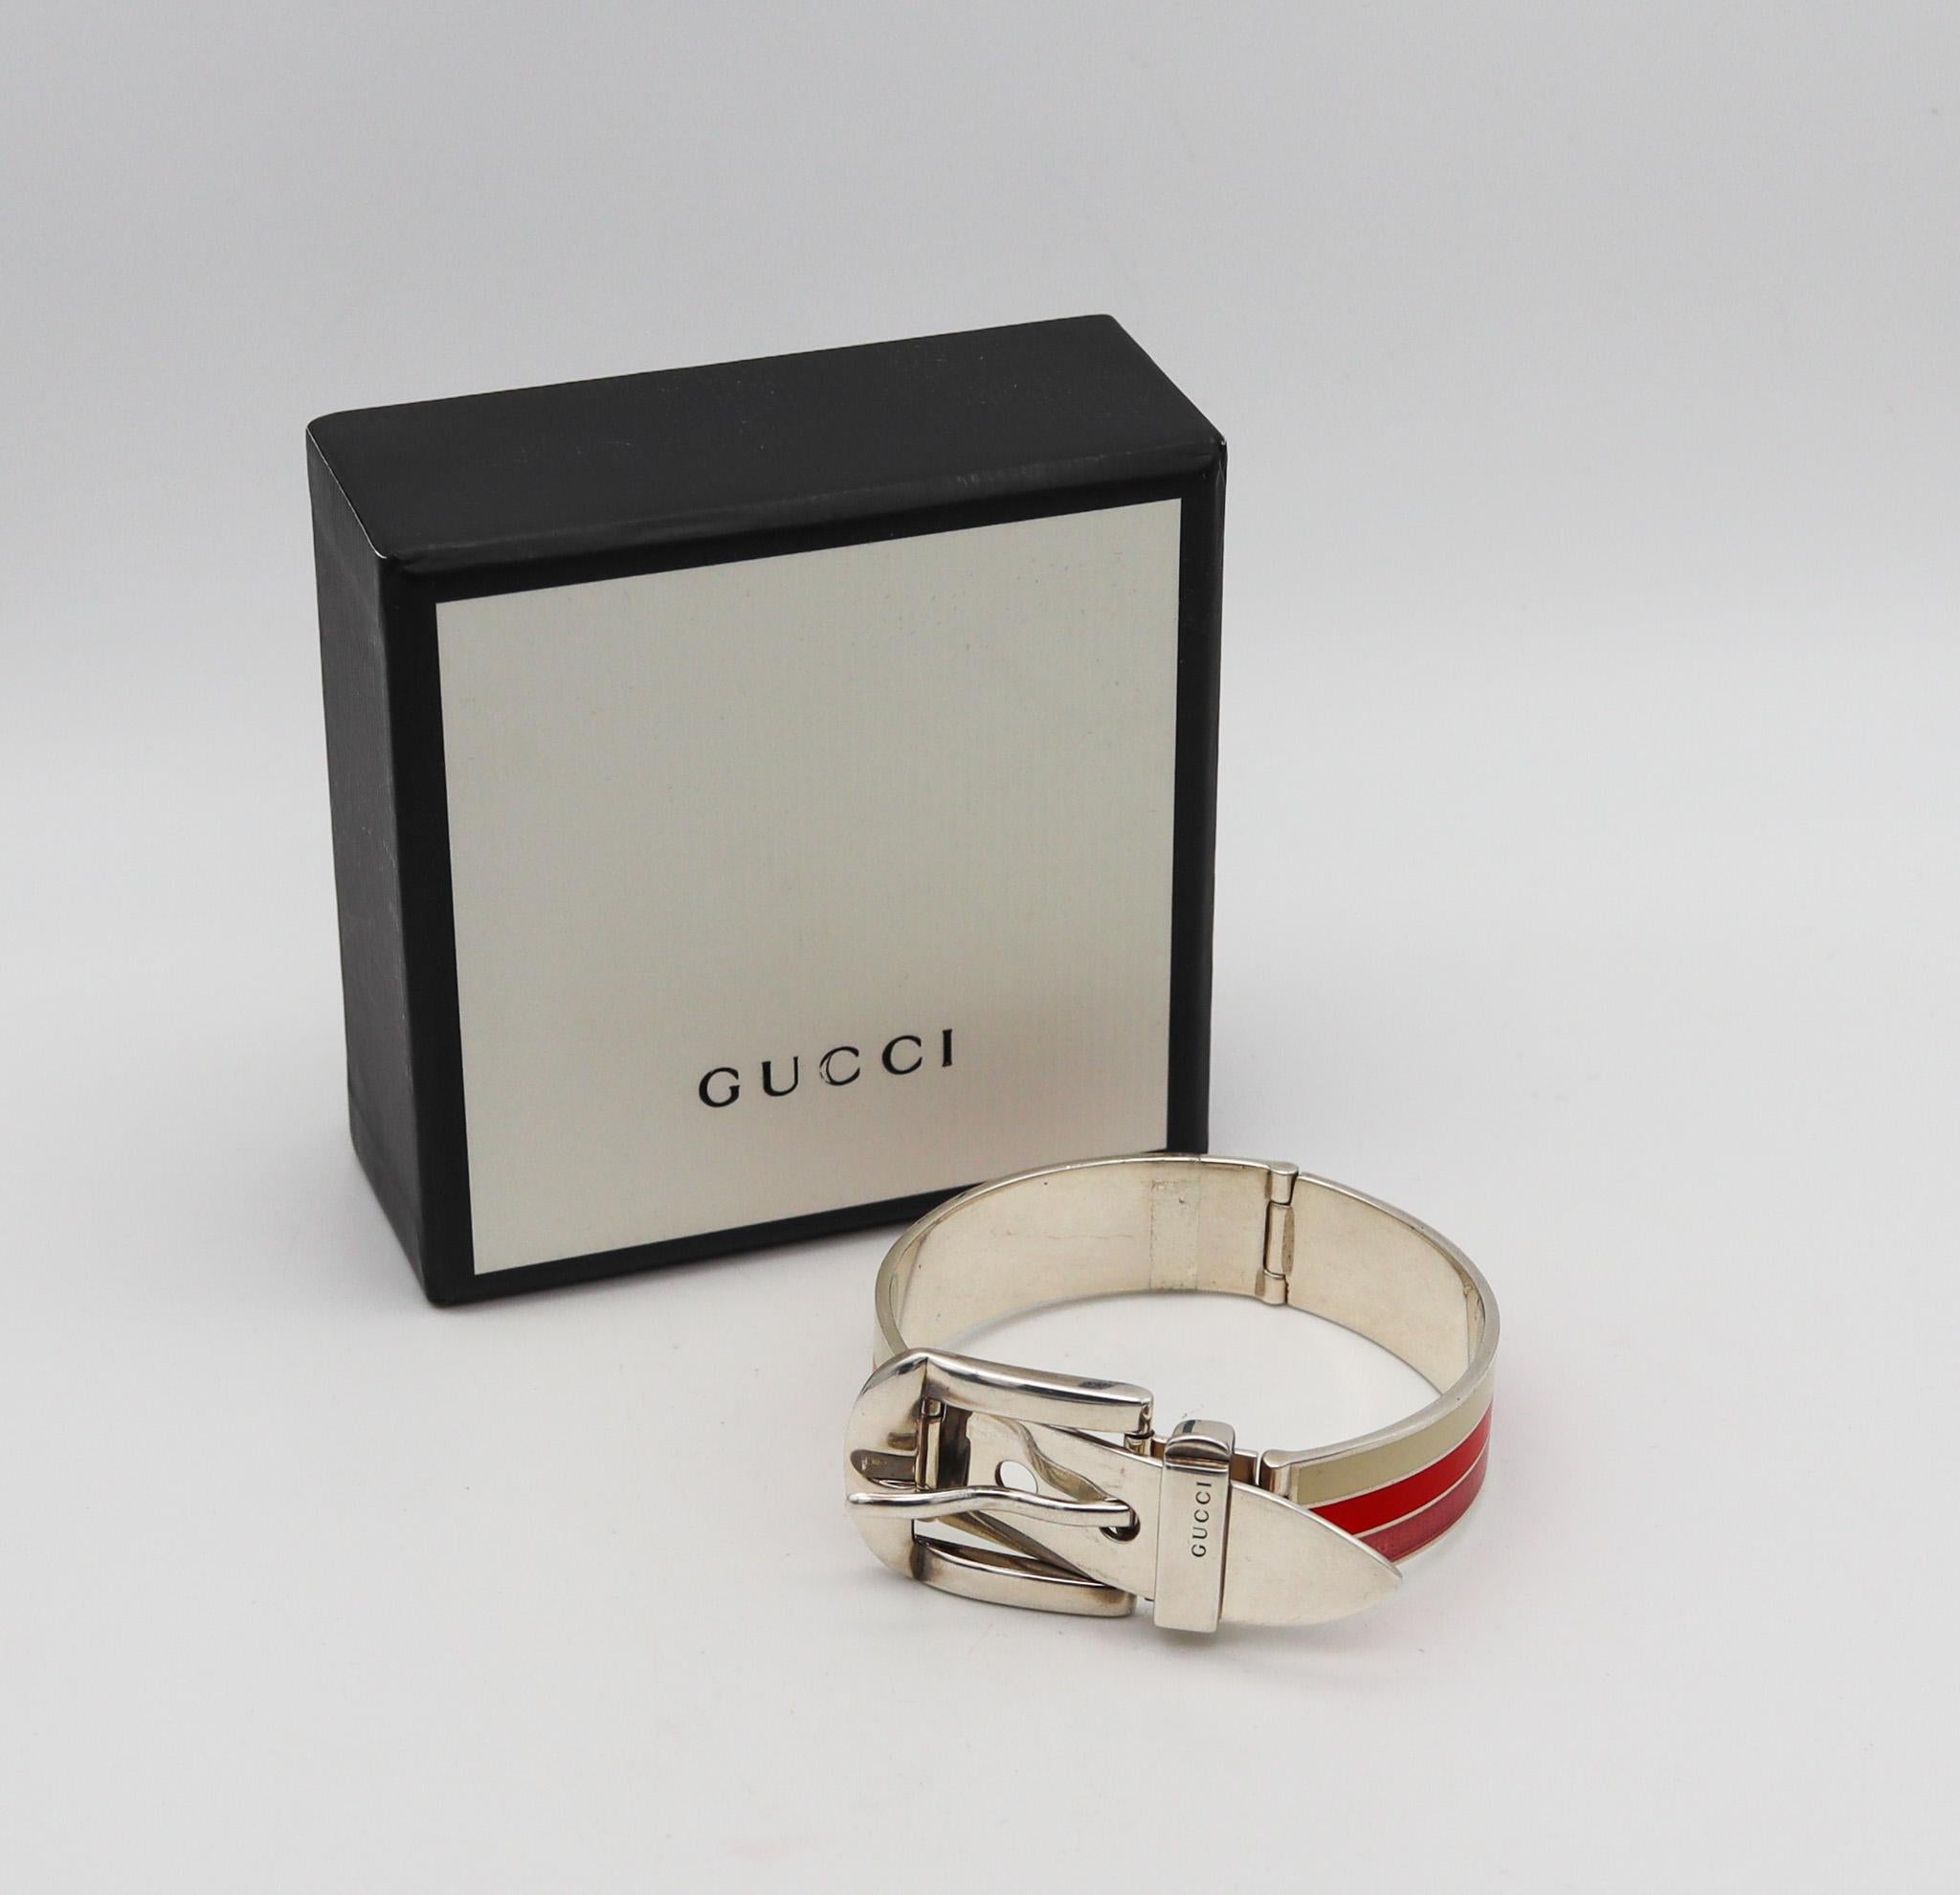 Enameled buckle bracelet designed by Gucci.

A rare vintage buckle bracelet, created in Florence Italy by the fashion house of Gucci, back in the 1980. This iconic bracelet was crafted in the shape of a belt buckle in solid .925/.999 sterling silver